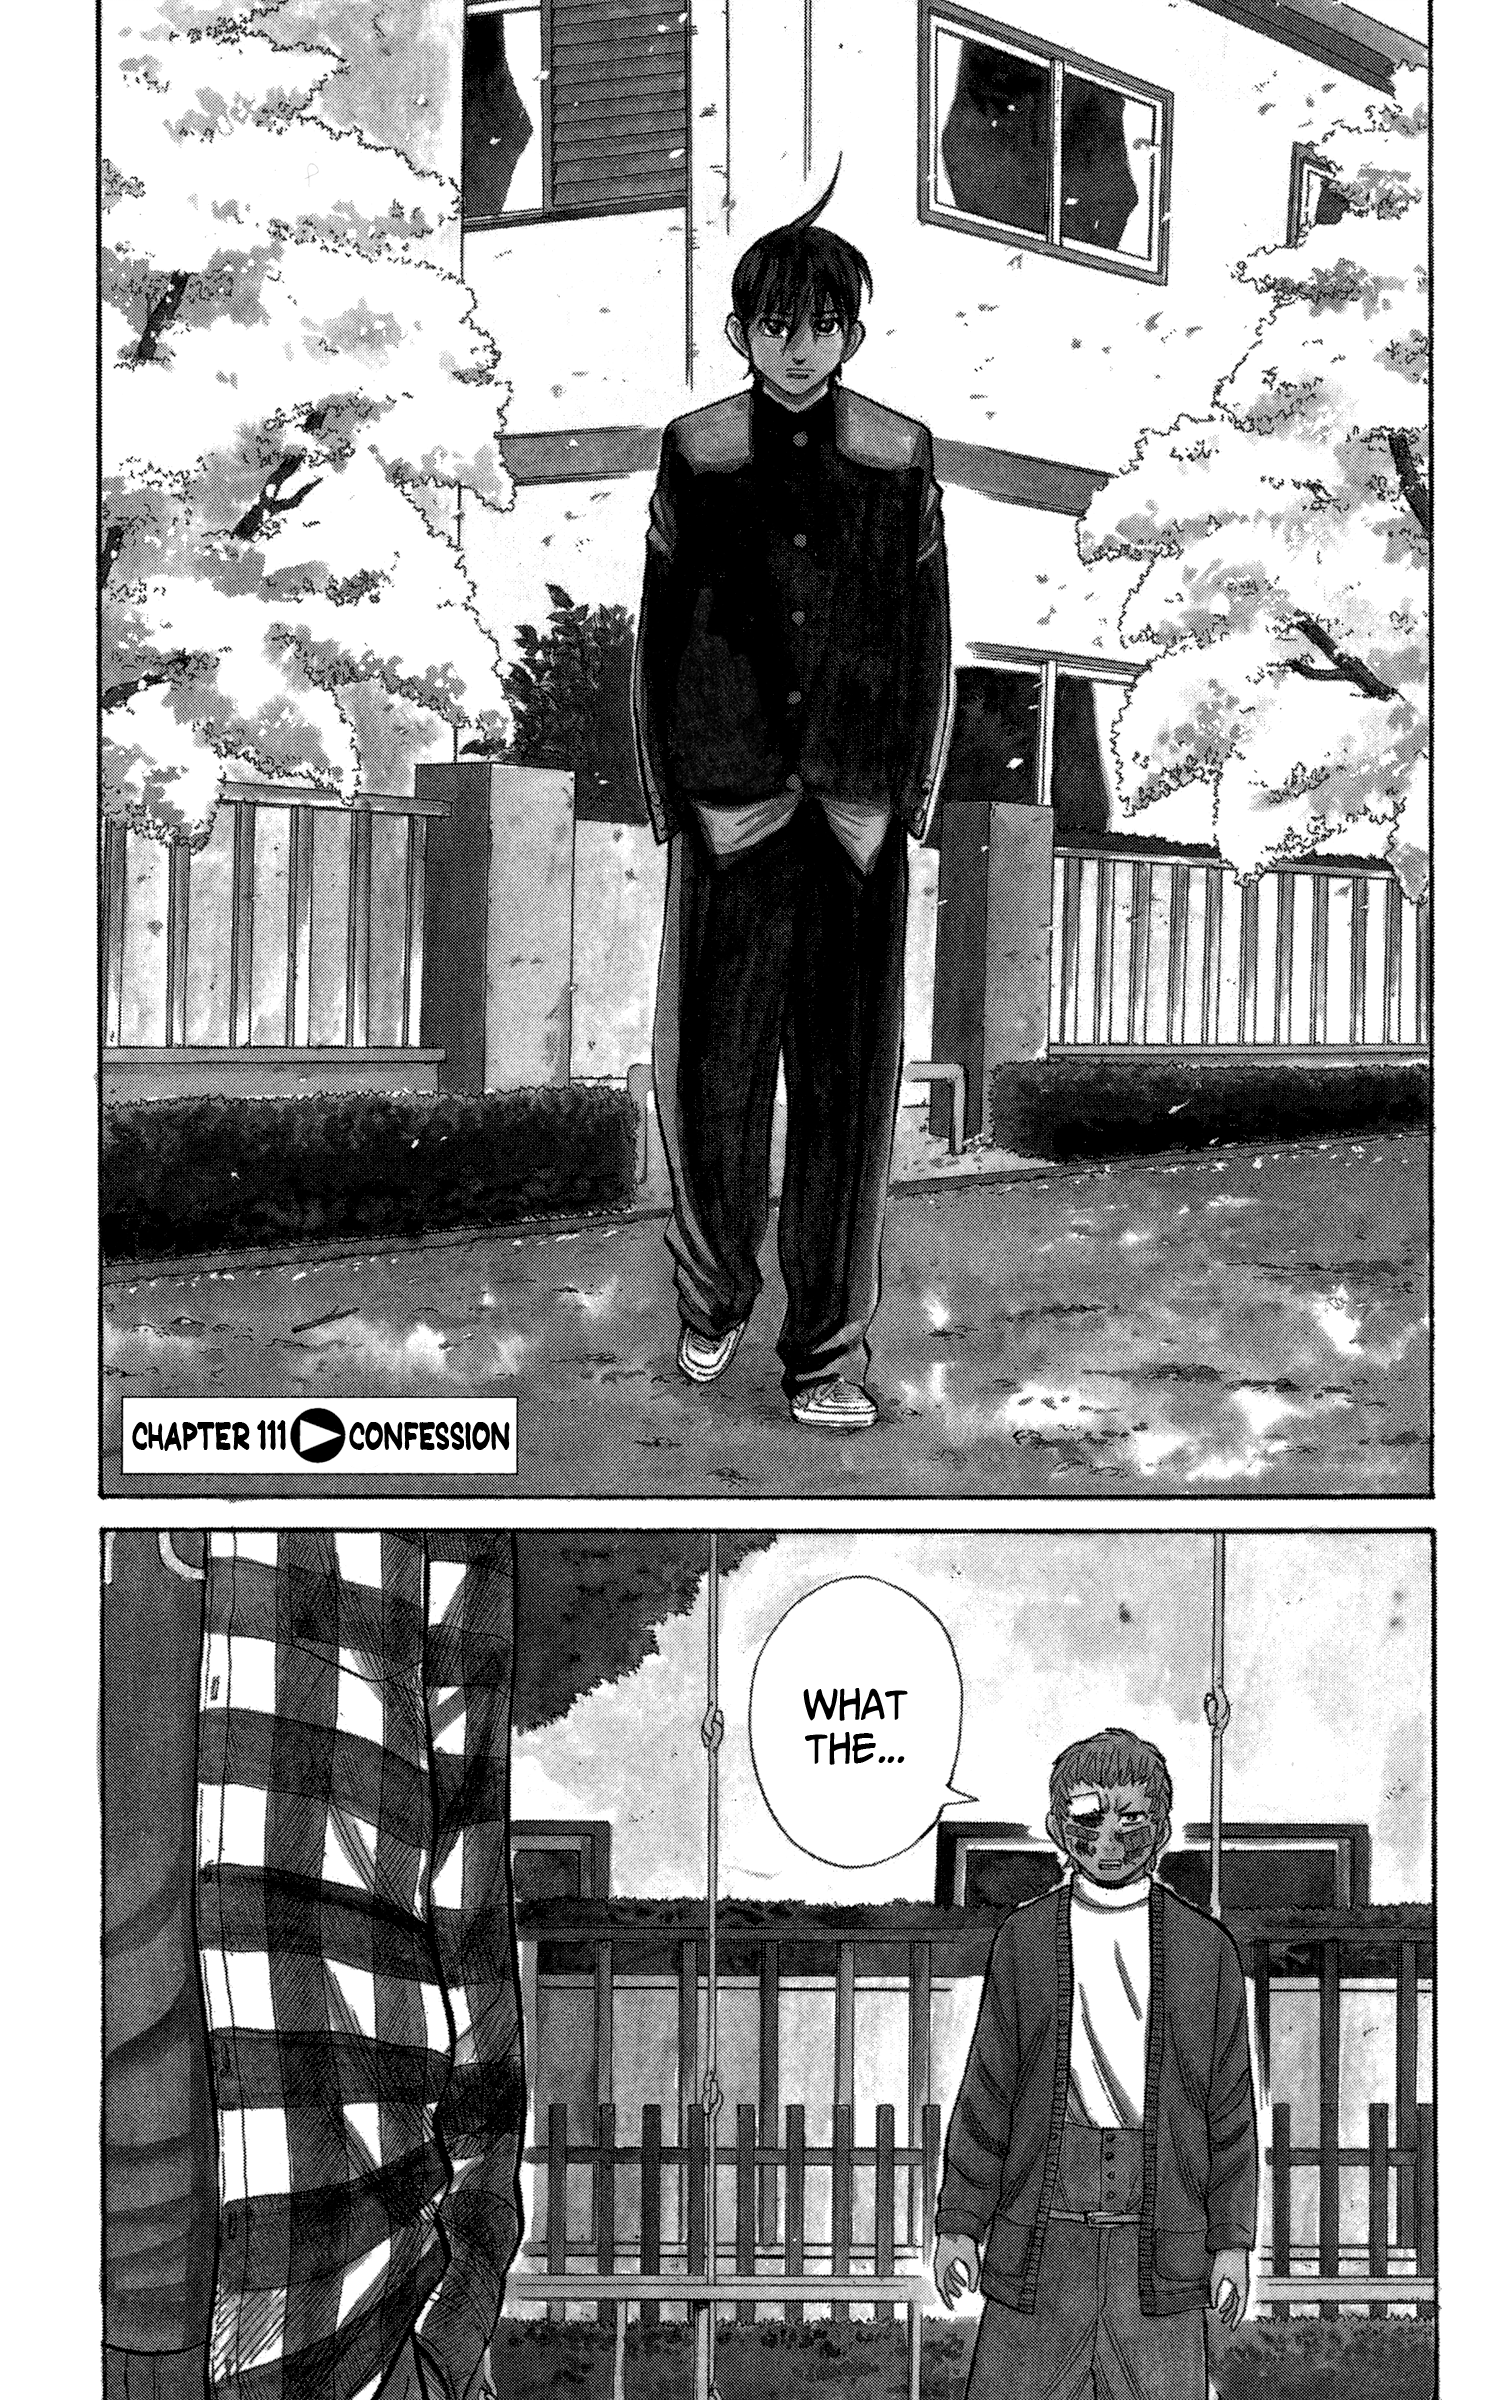 Nanba Mg5 Vol.13 Chapter 111: Confession - Picture 1